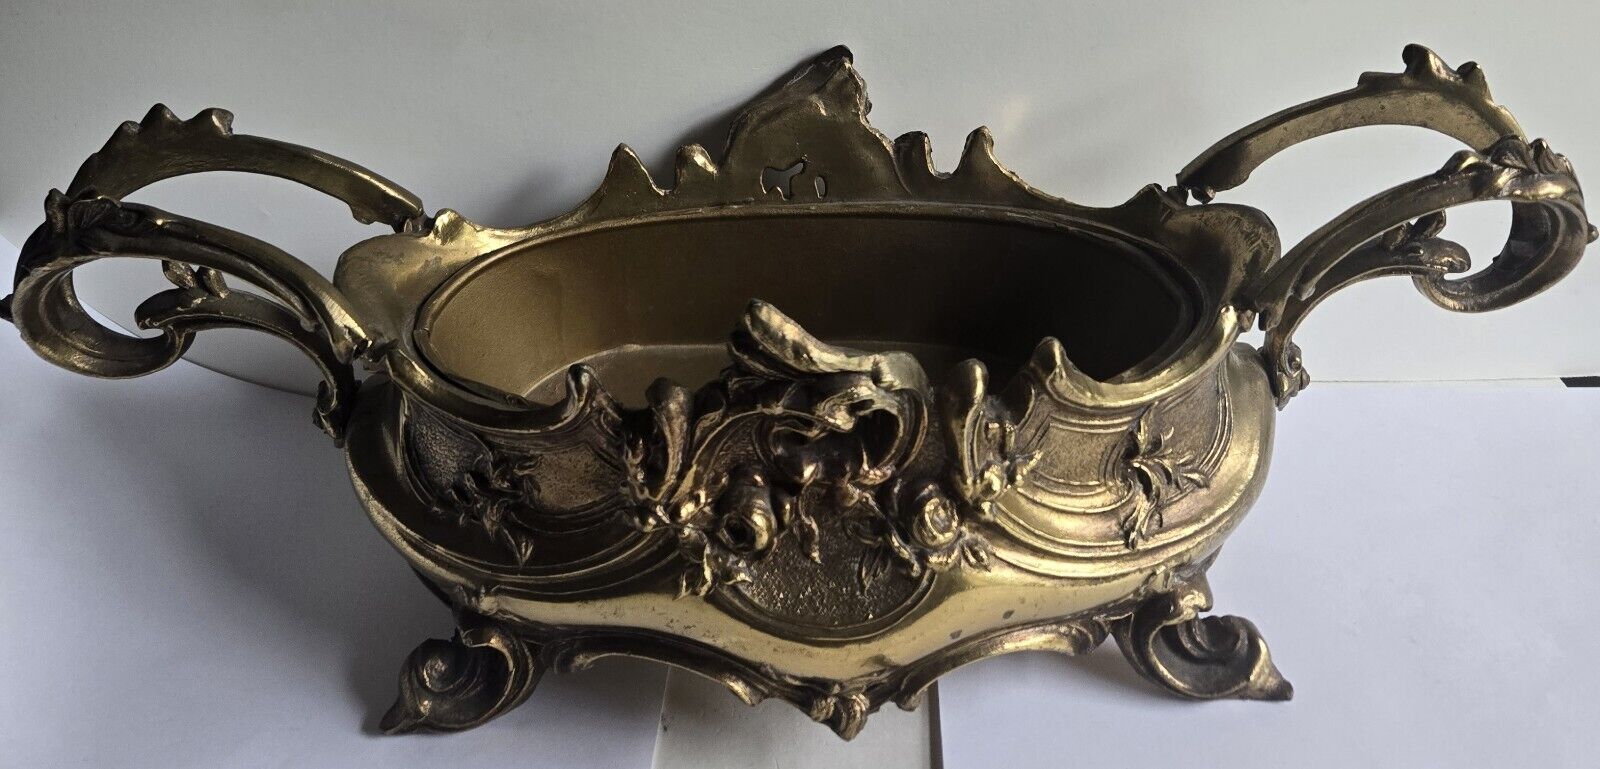 Antique Vintage Brass Rococo Footed Jardiniere Planter With Oval Insert